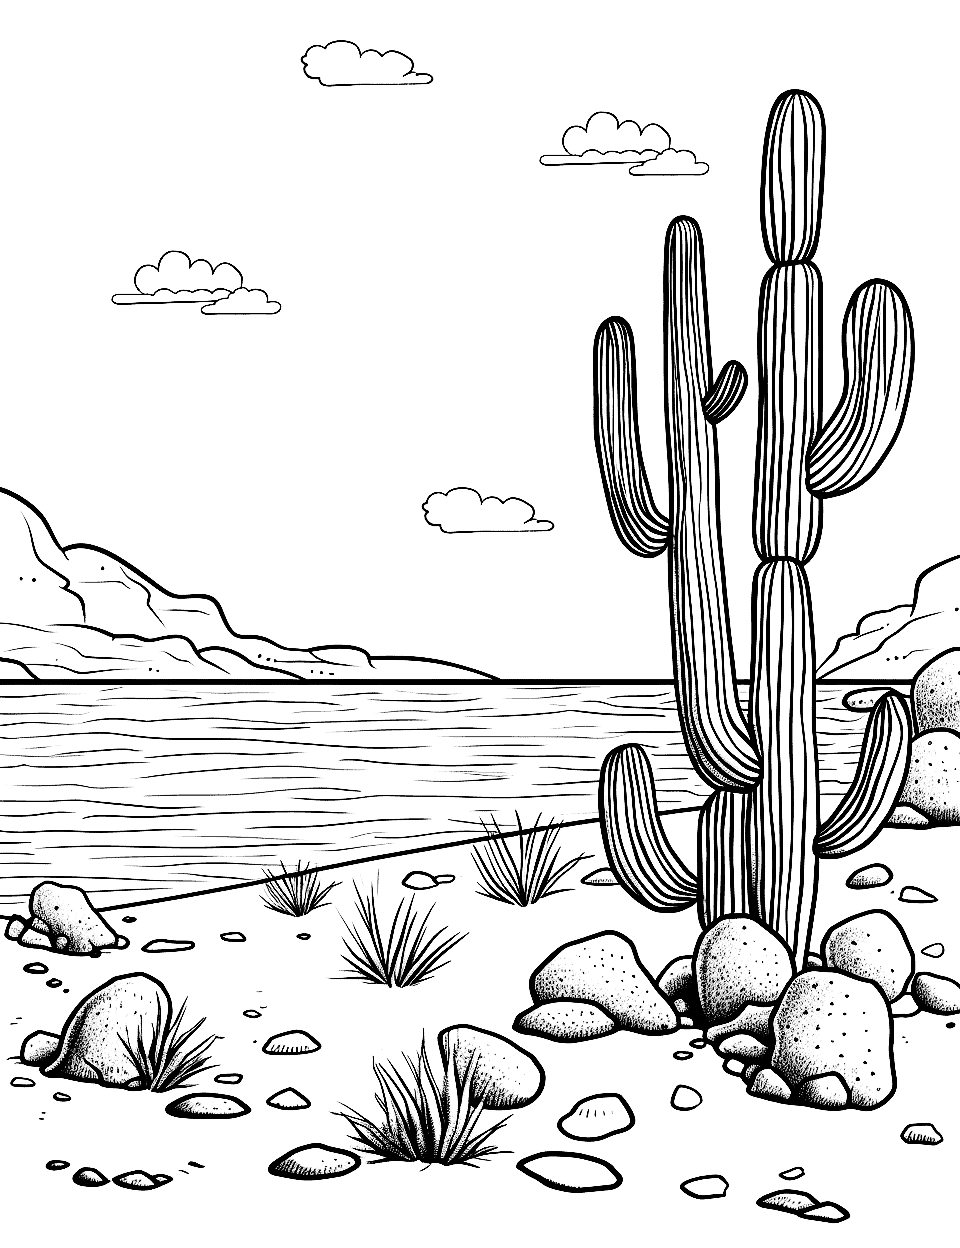 Ocean Meets Desert Cactus Coloring Page - An imaginative scene where the desert, with its cacti, meets the ocean shore.